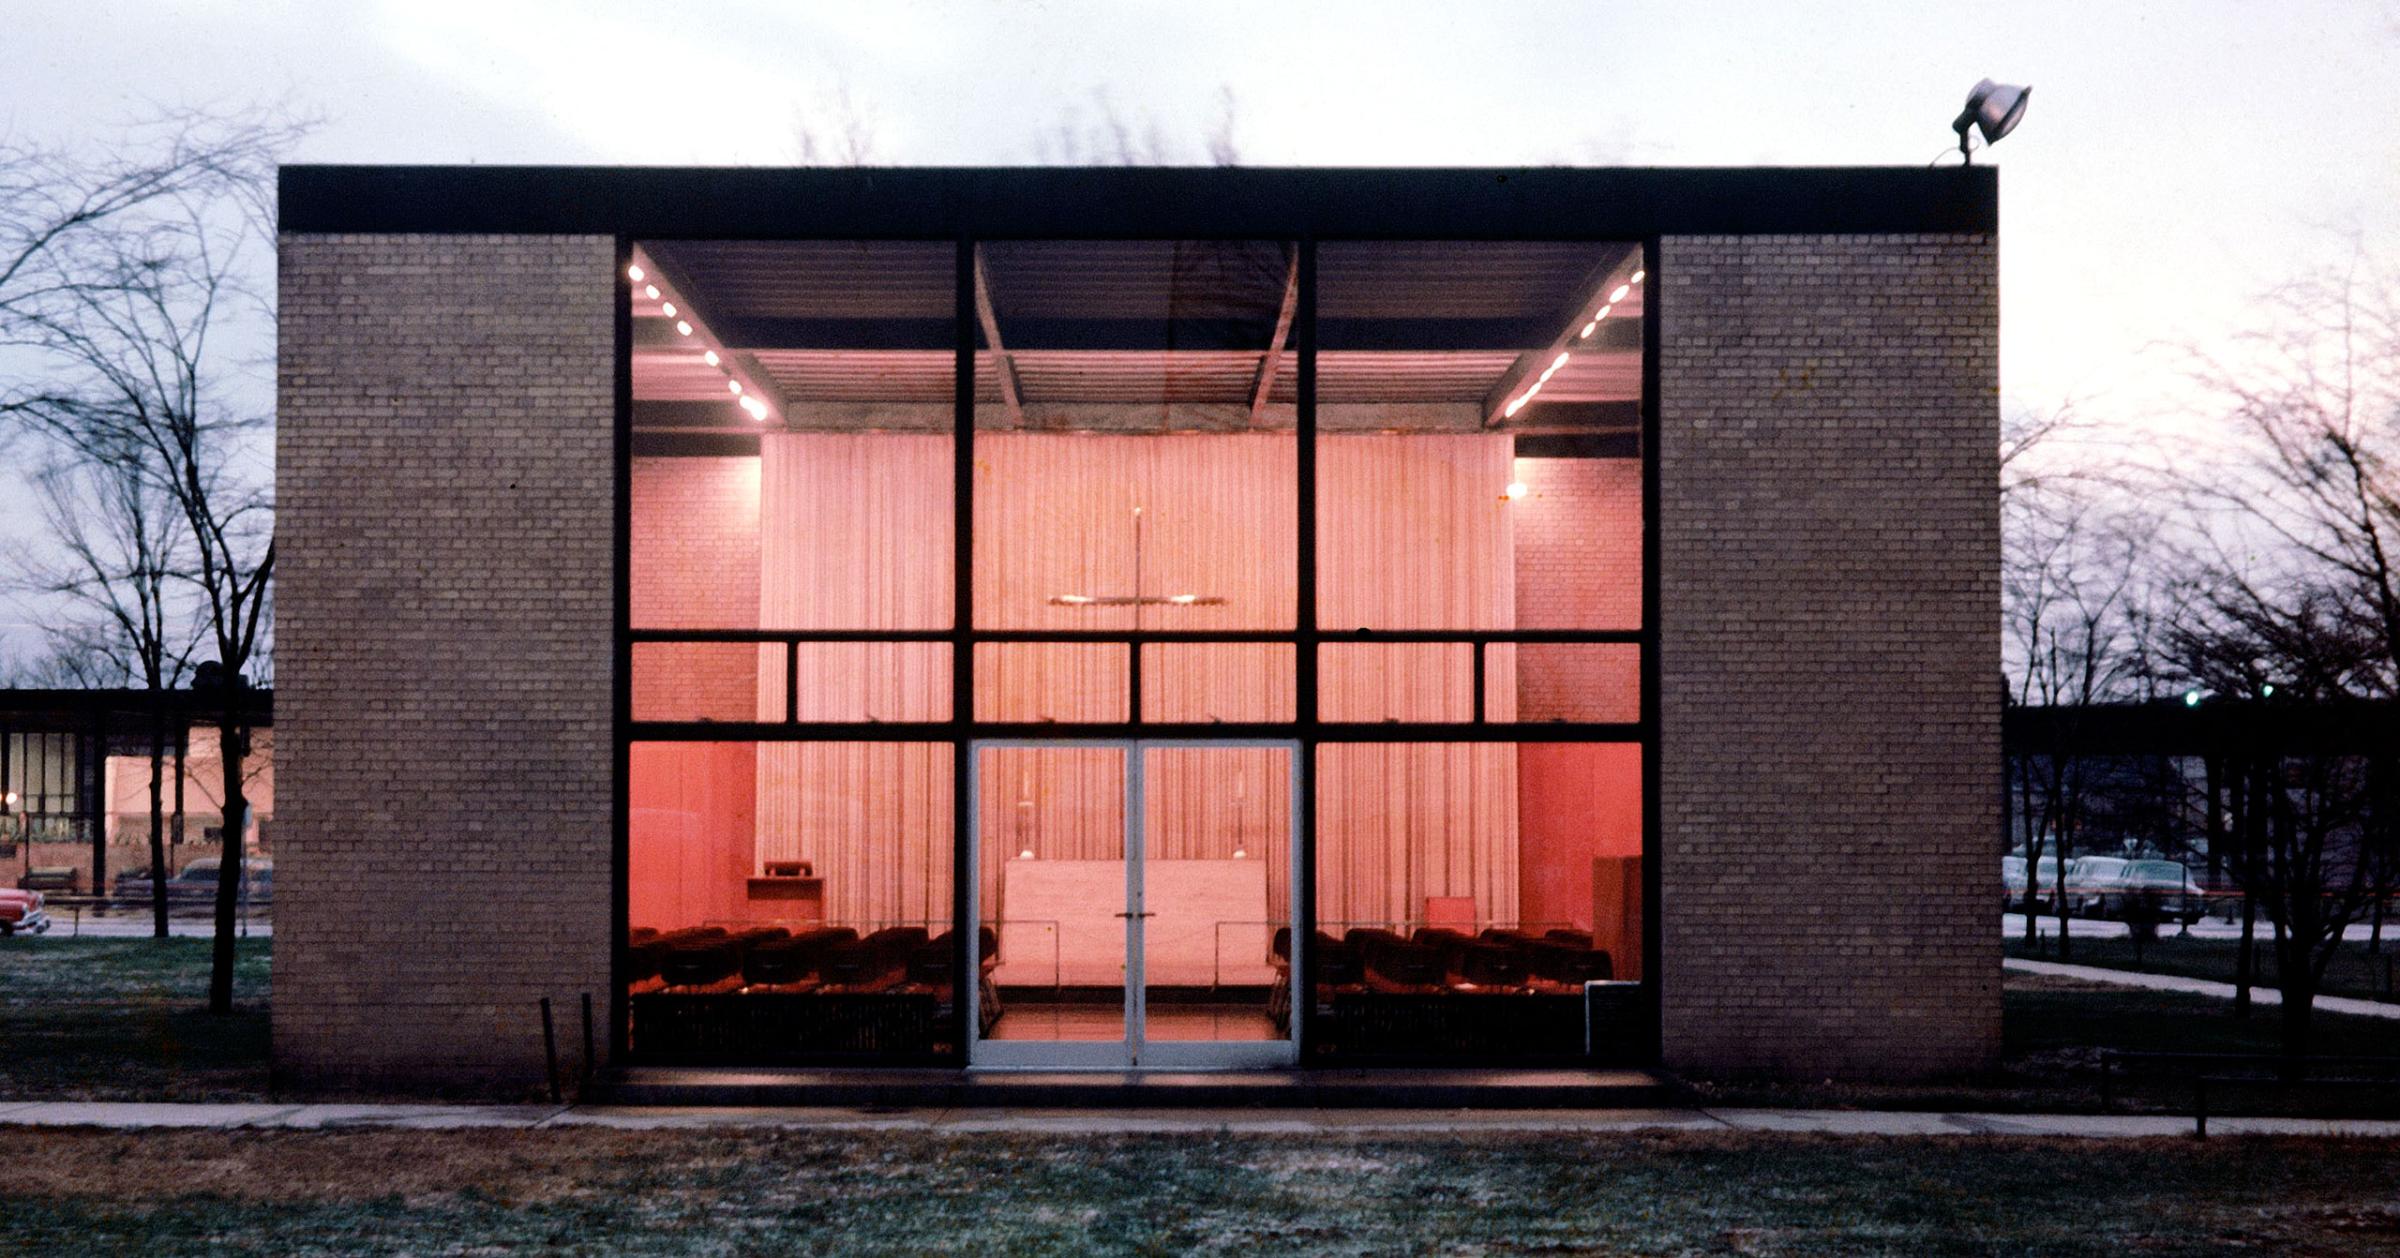 Spiritual simplicity was Mies' aim in designing the Illinois Tech Chapel. Maintaining the basic campus pattern, he insisted on flat-roofed rectangle but provided brick walls to give the chapel a sense of privacy and solitude. Steel mullions of the facade echo shape of the cross above the altar